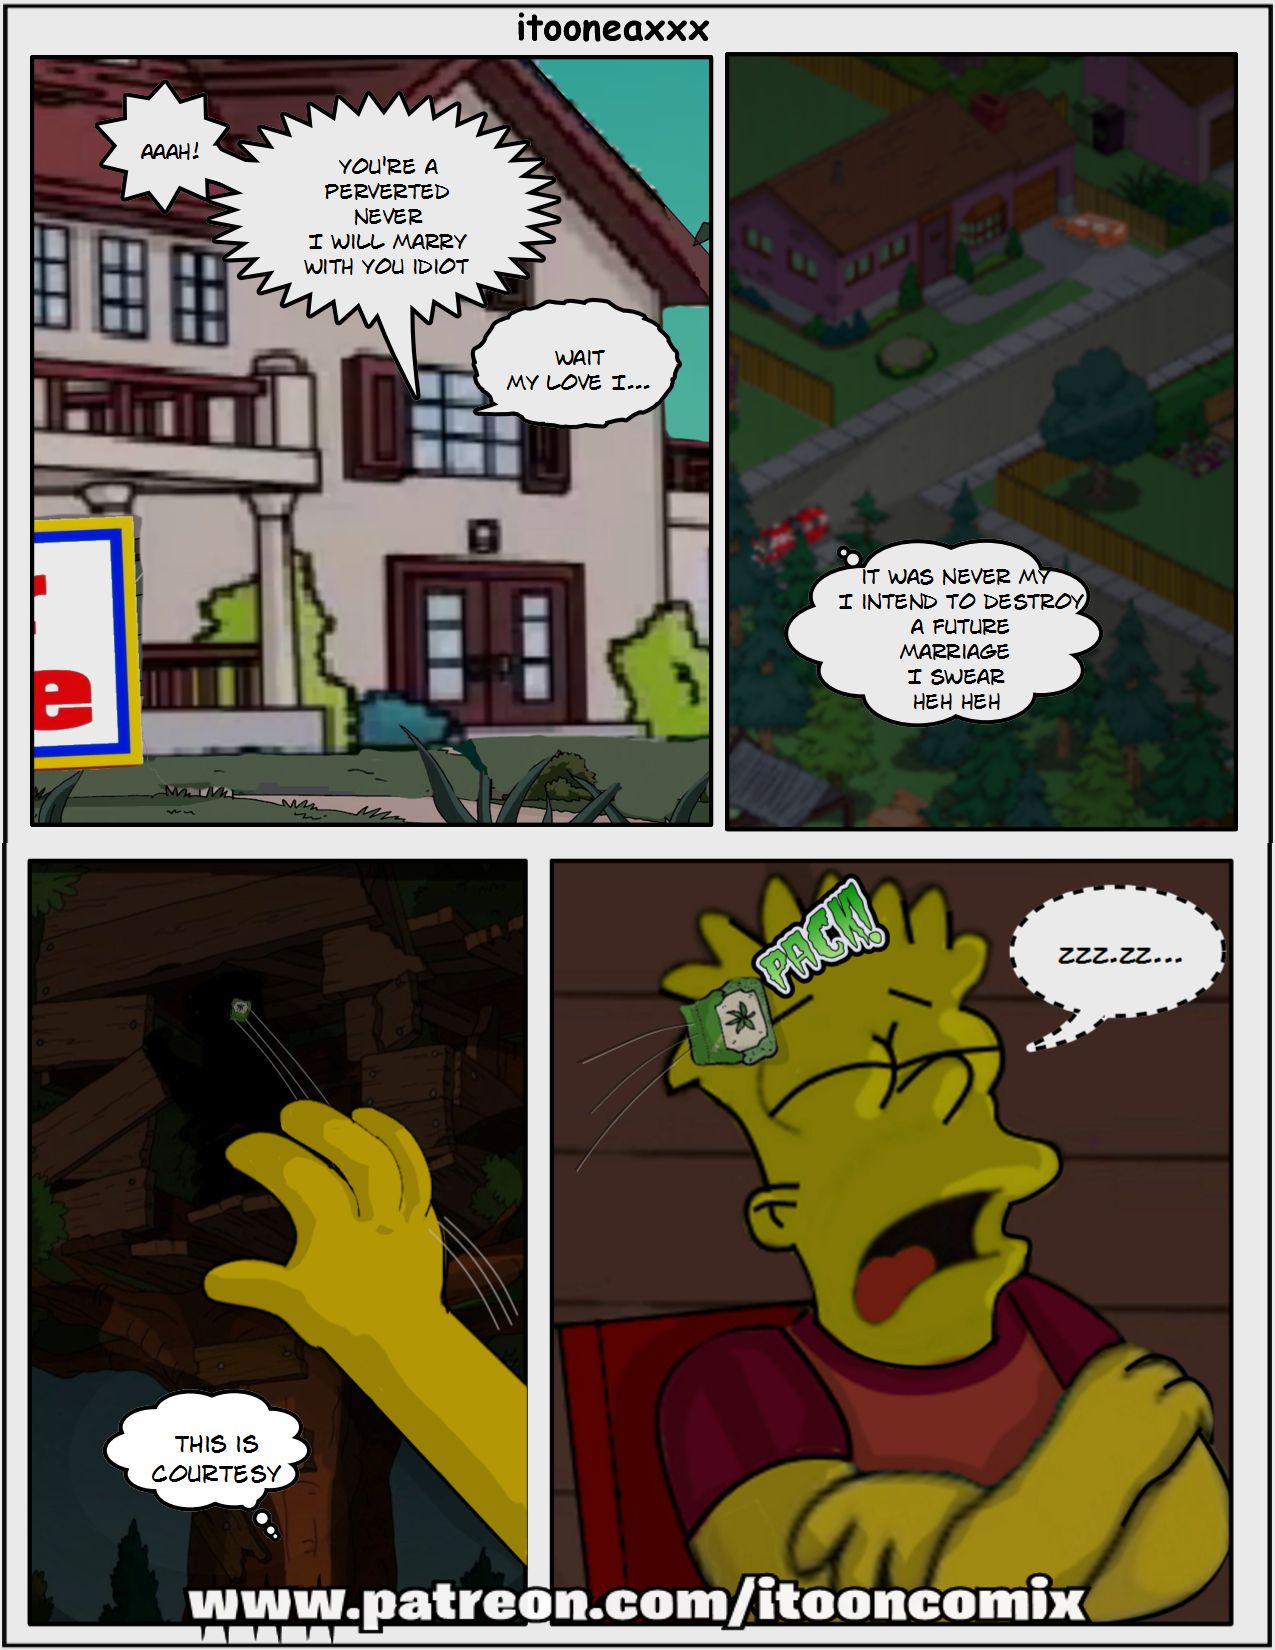 Snake 2 – The Simpsons by Itooneaxxx